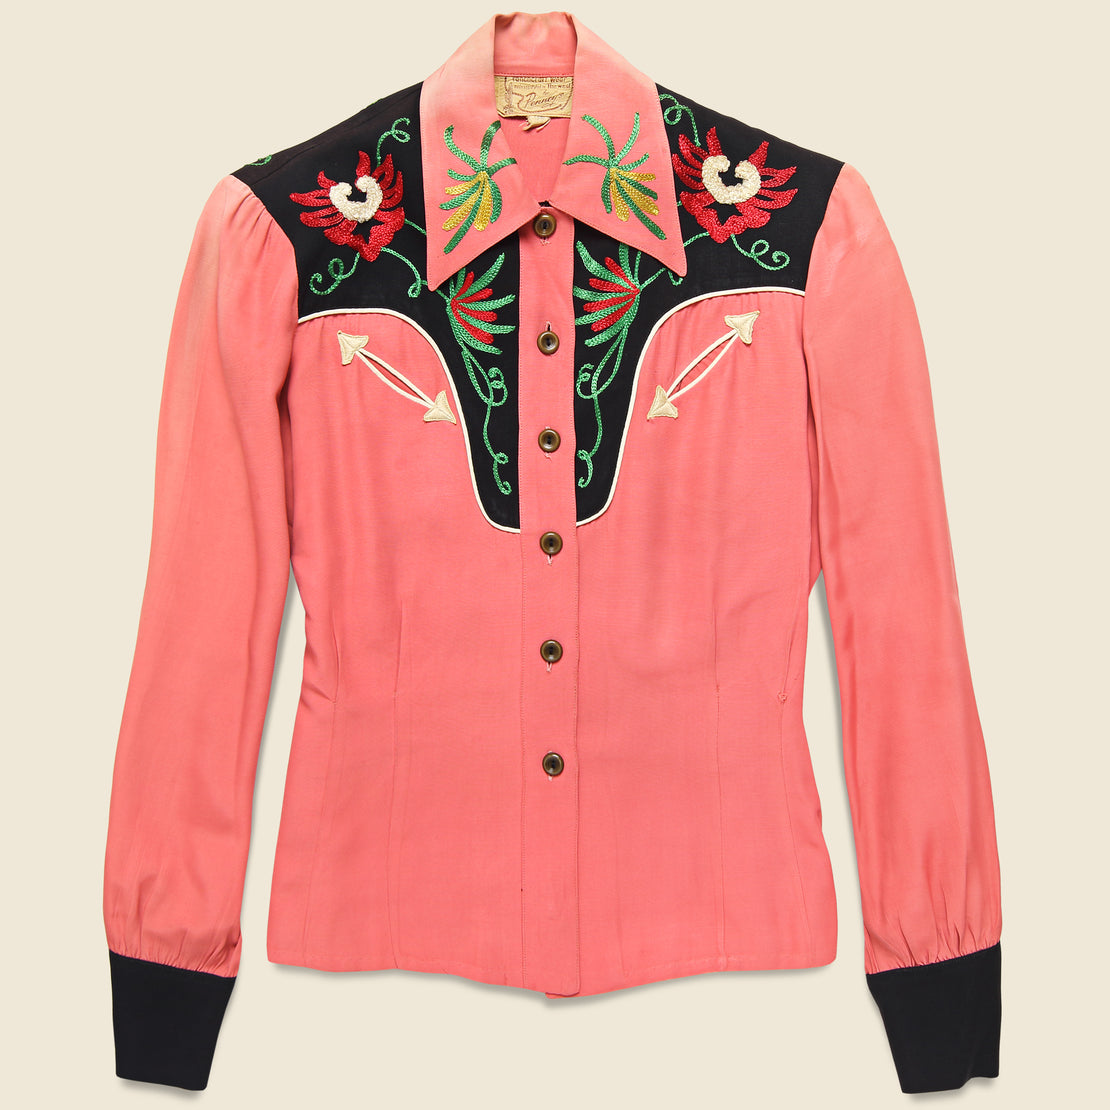 Vintage Penneys Ranchcraft Western Embroidered Blouse - Coral Pink